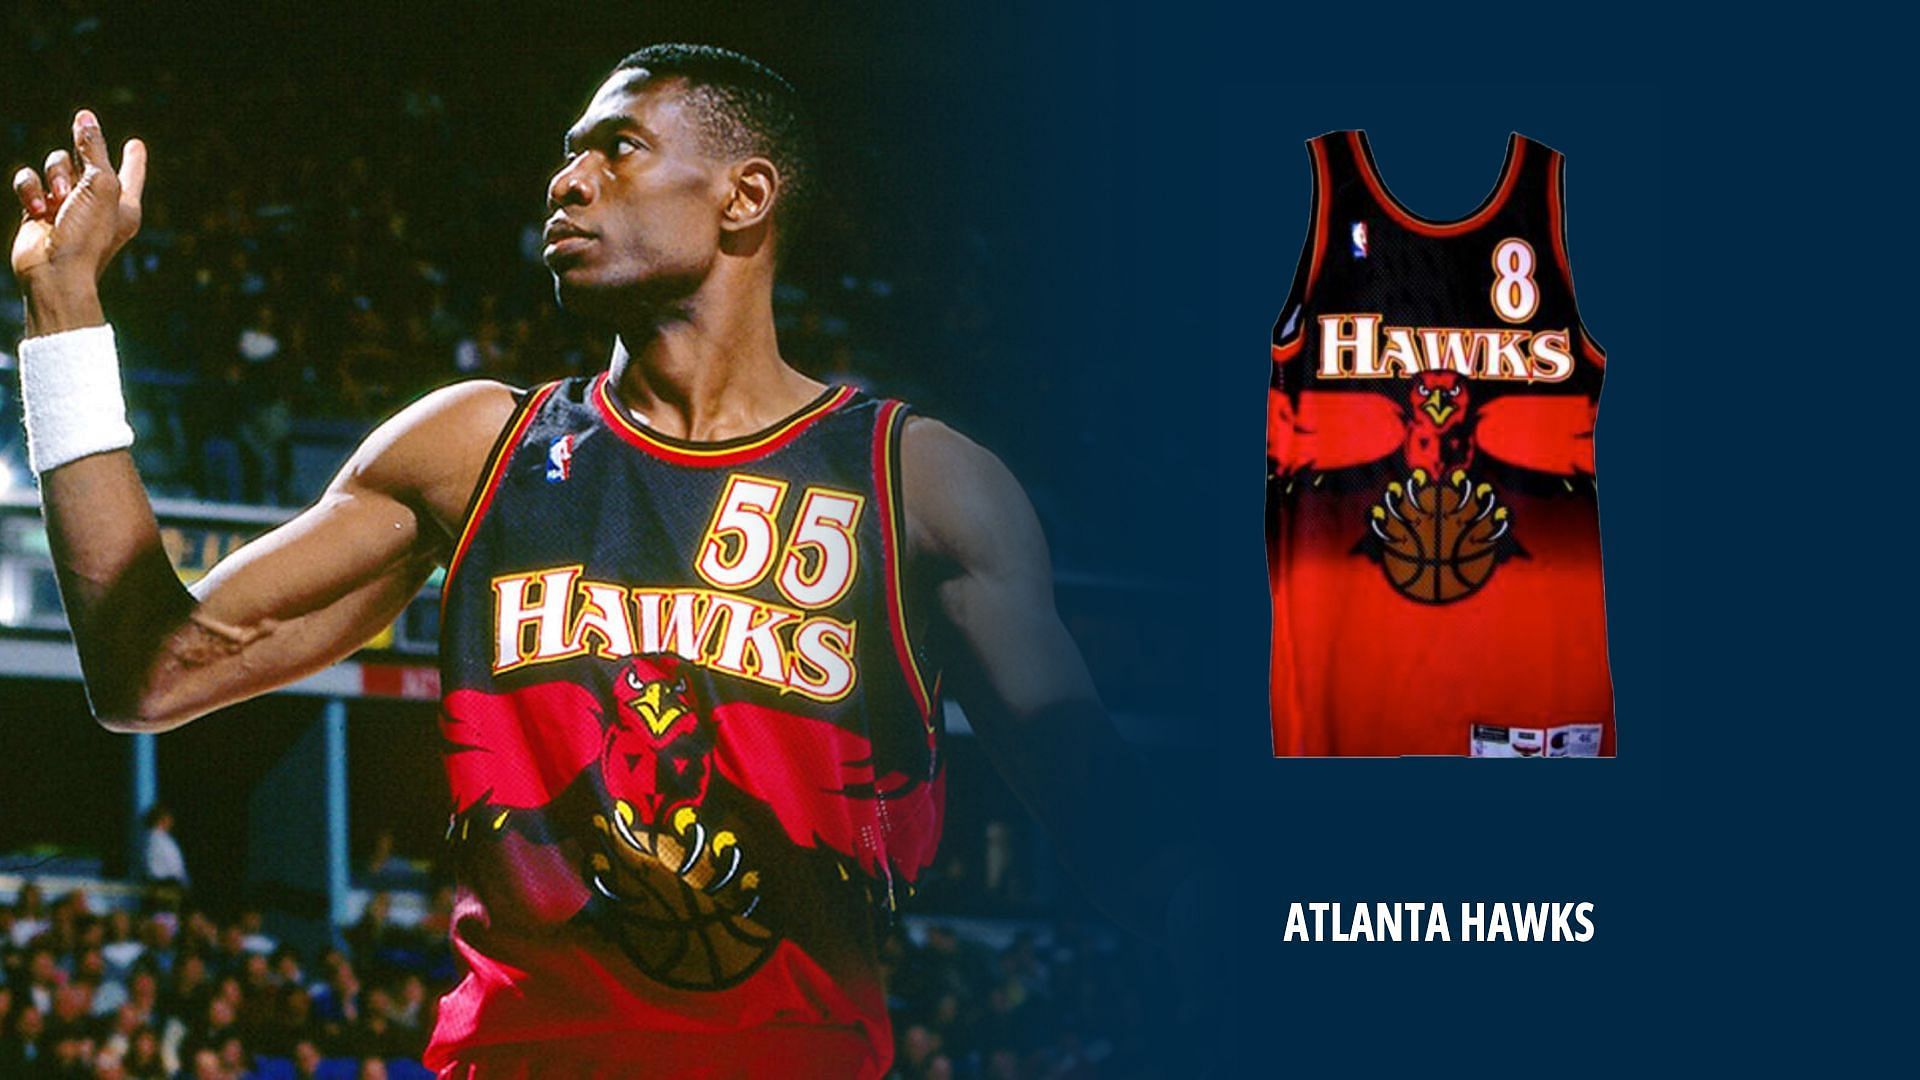 Putting a hawk on a jersey worked out perfectly for Atlanta